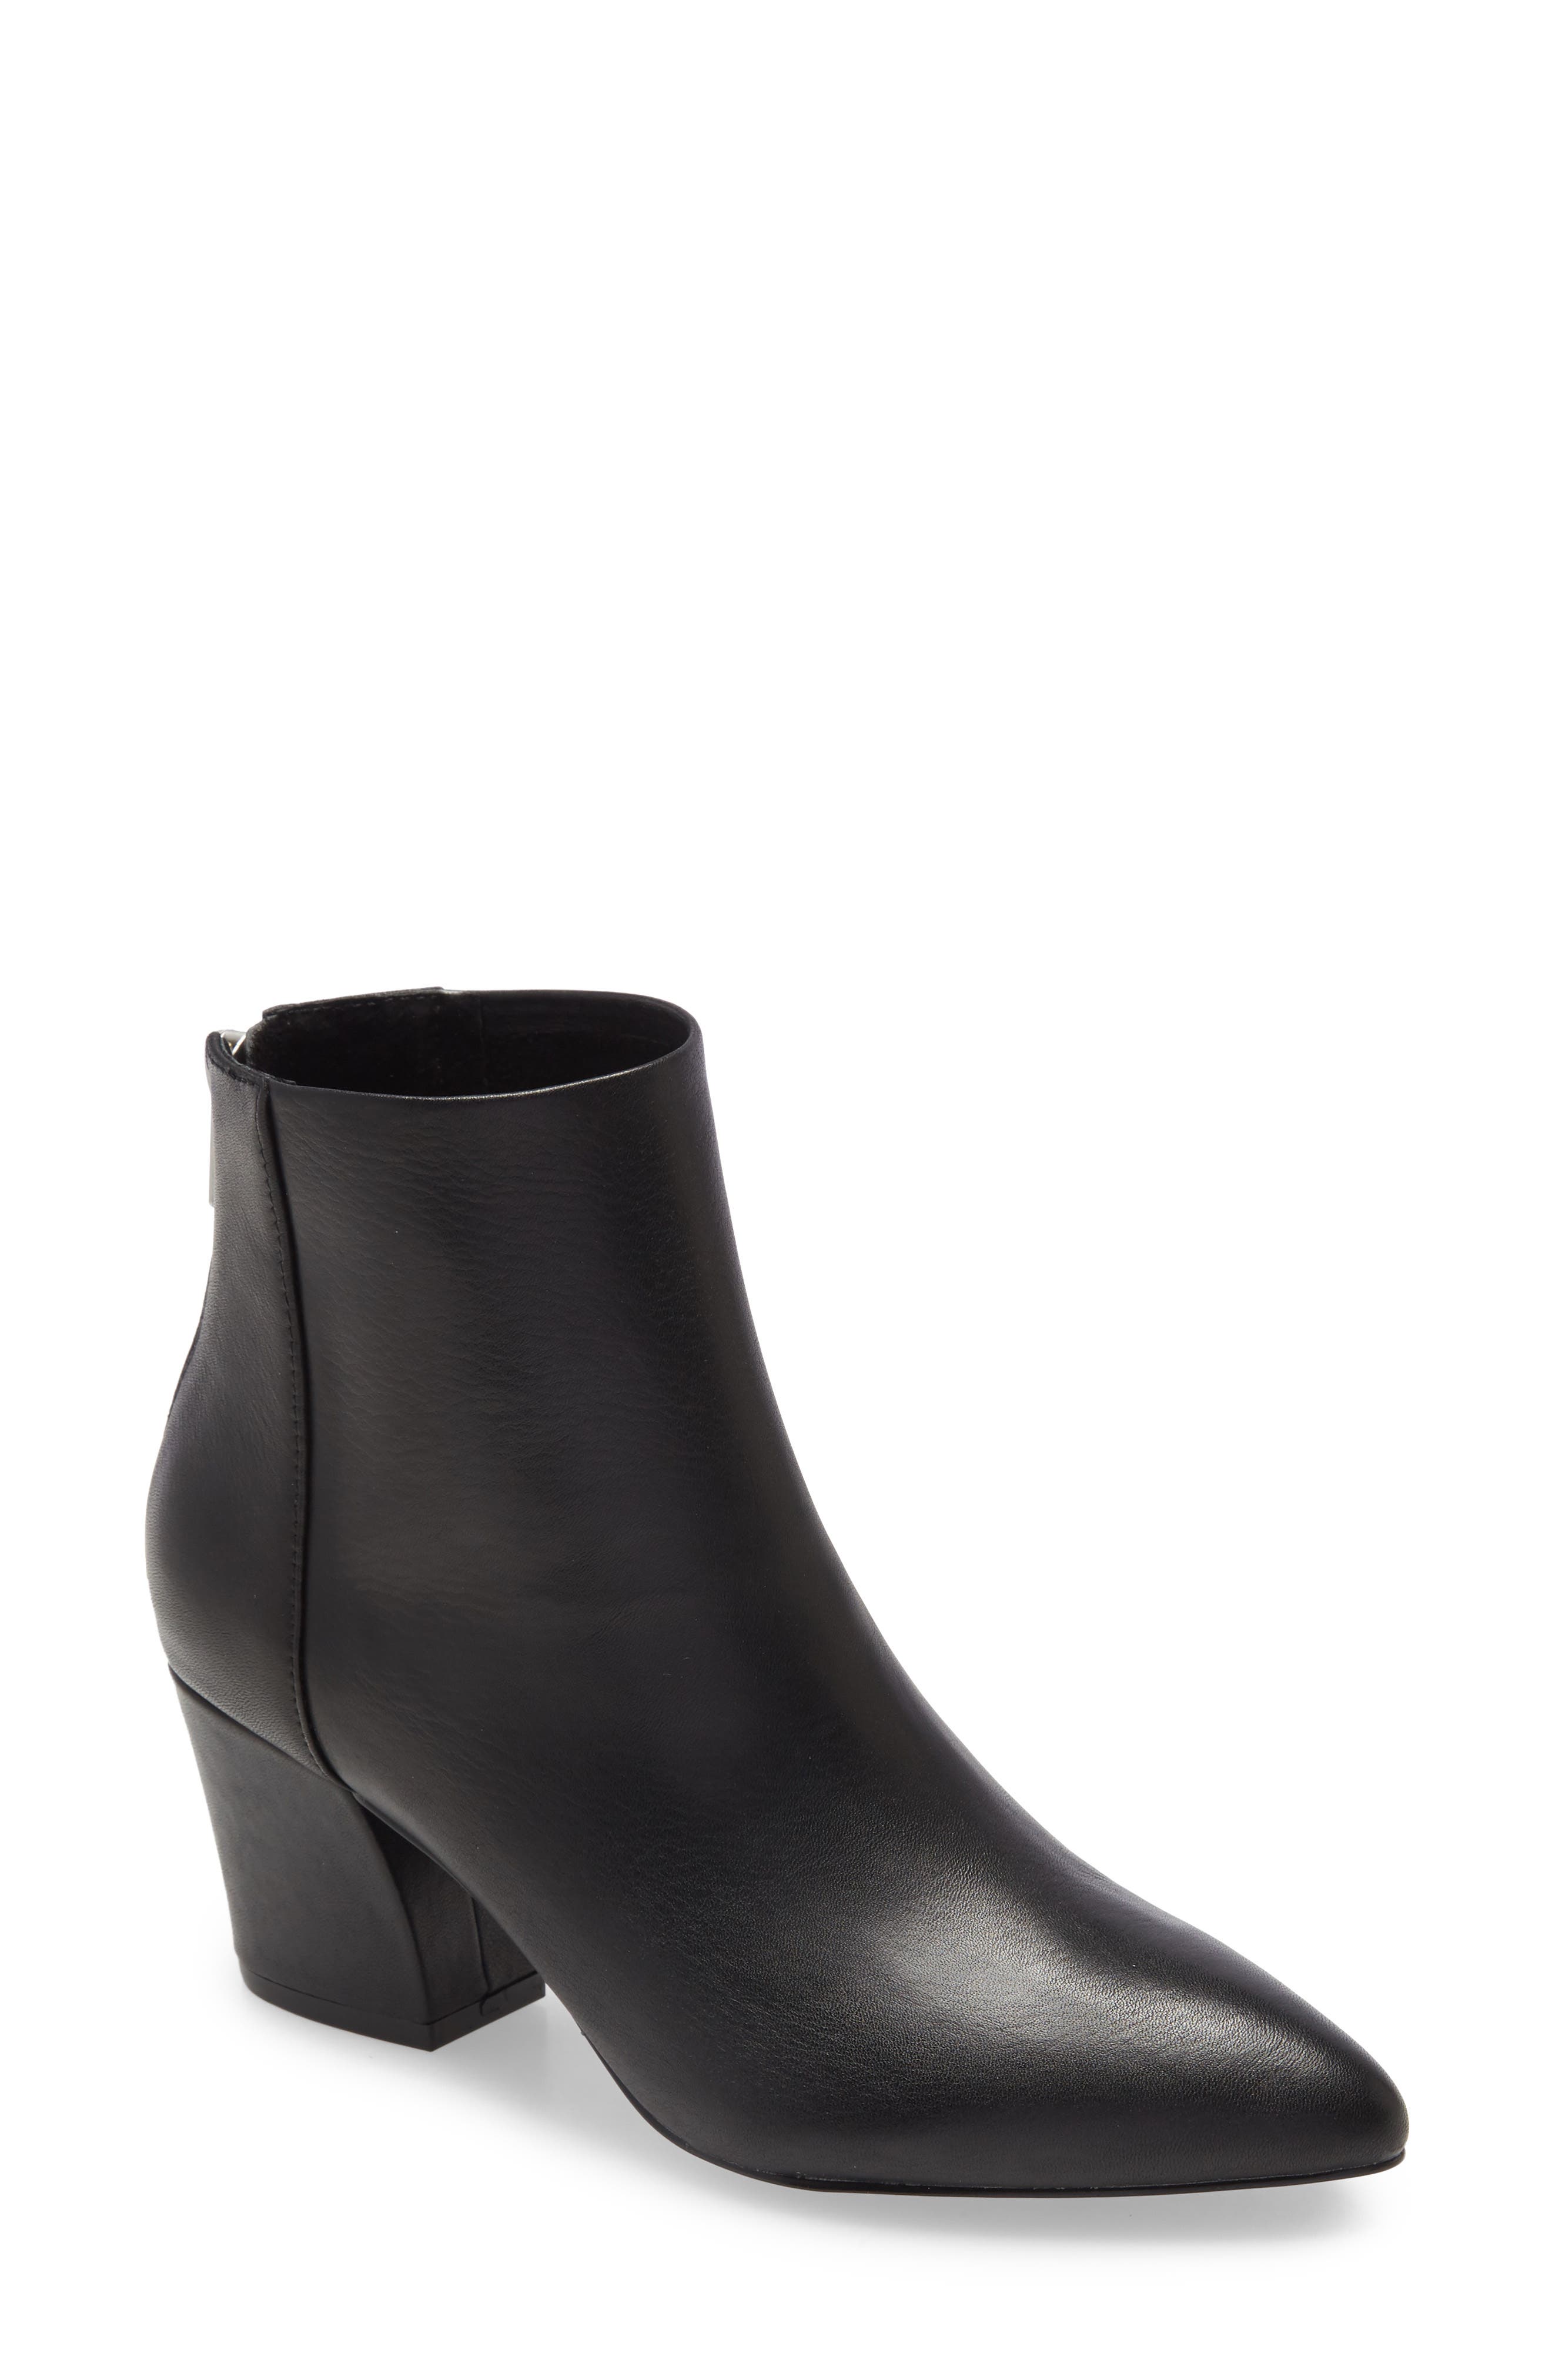 steve madden pointed toe boots